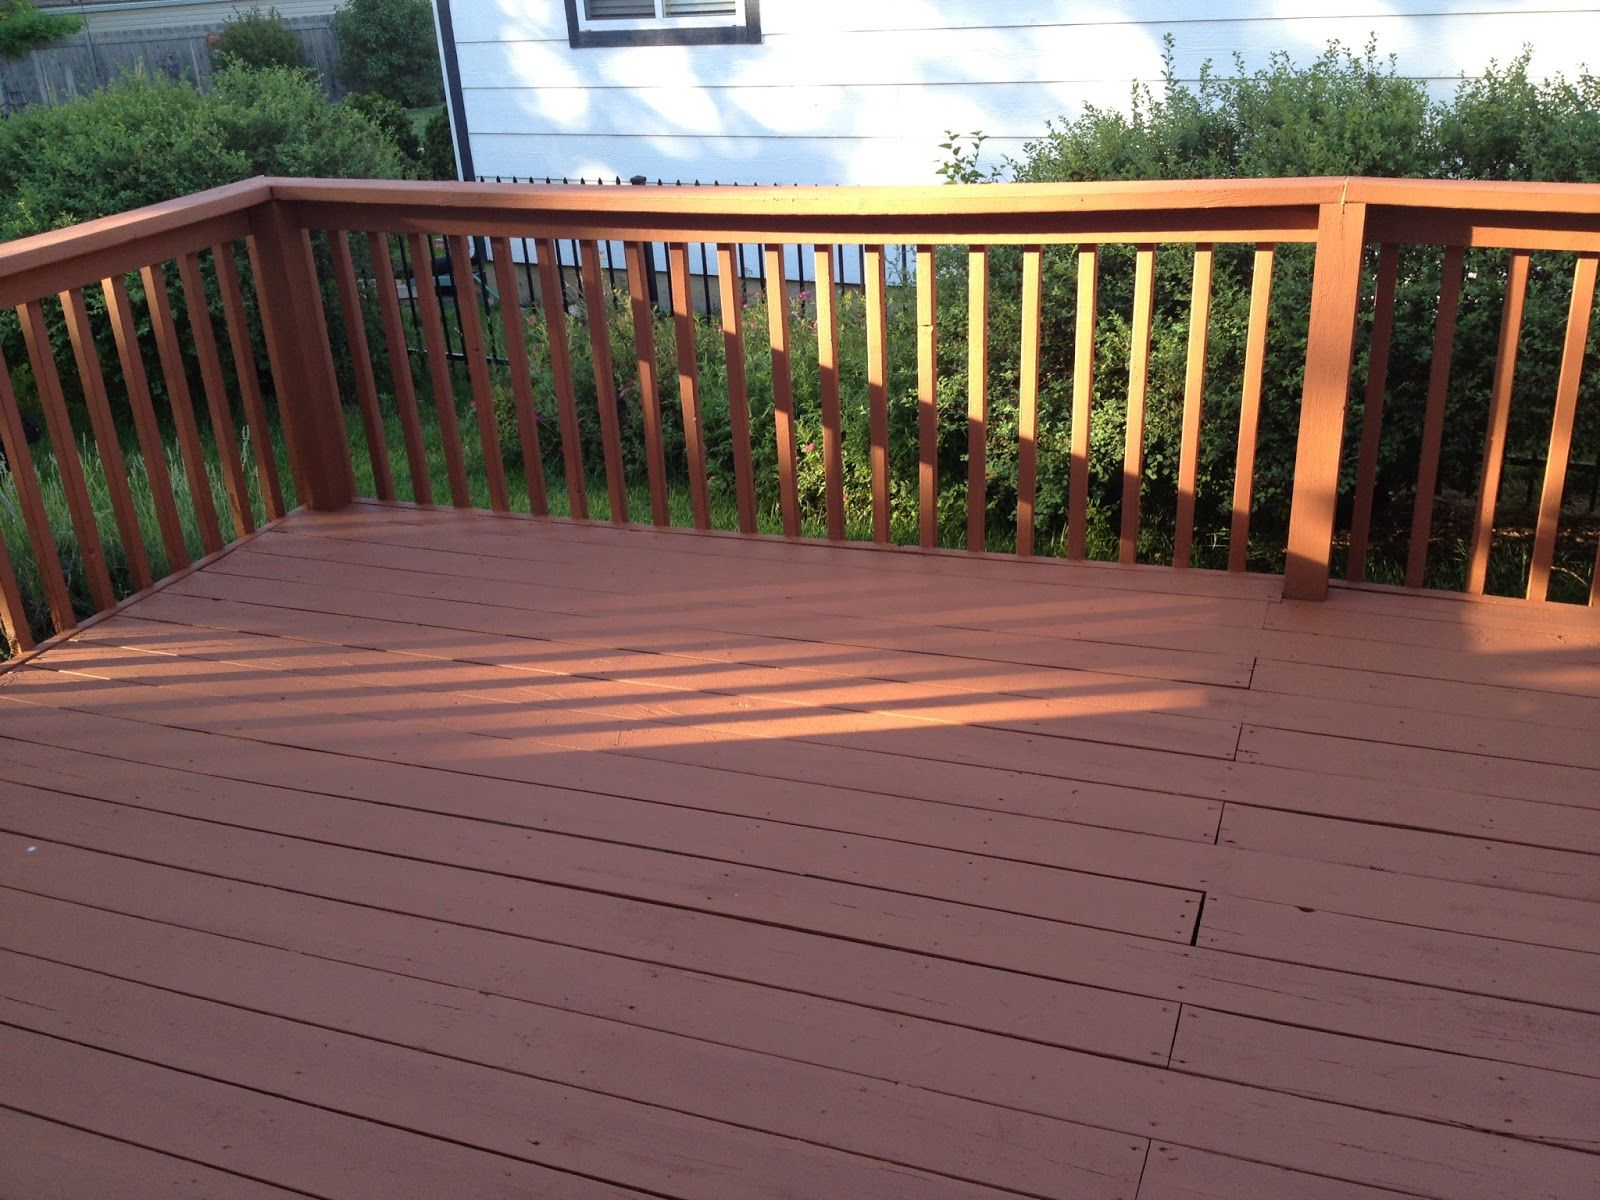 Behr Deckover Cappuccino Solid Color Behr Weatherproof Wood Stain with regard to sizing 1600 X 1200